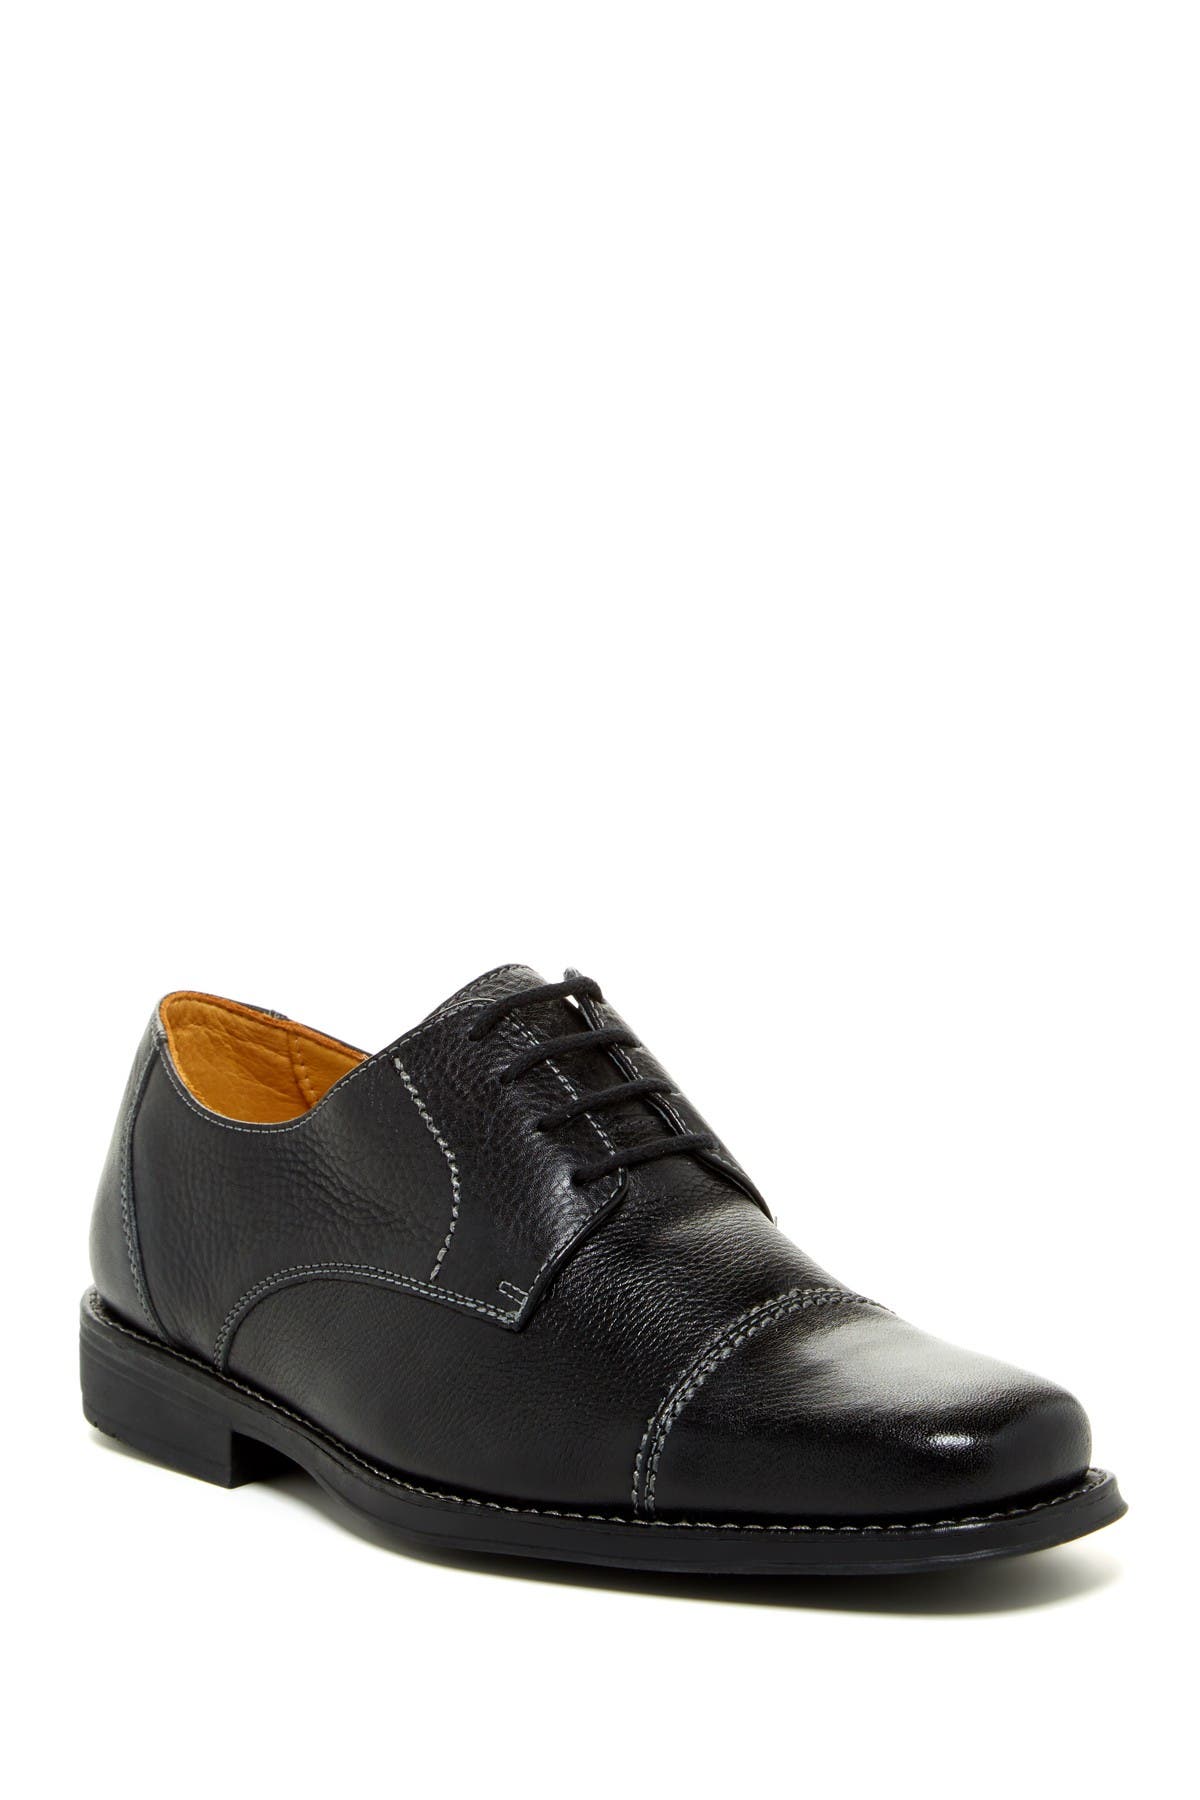 Sandro Moscoloni | Norridge Cap Toe Derby - Wide Width Available ...